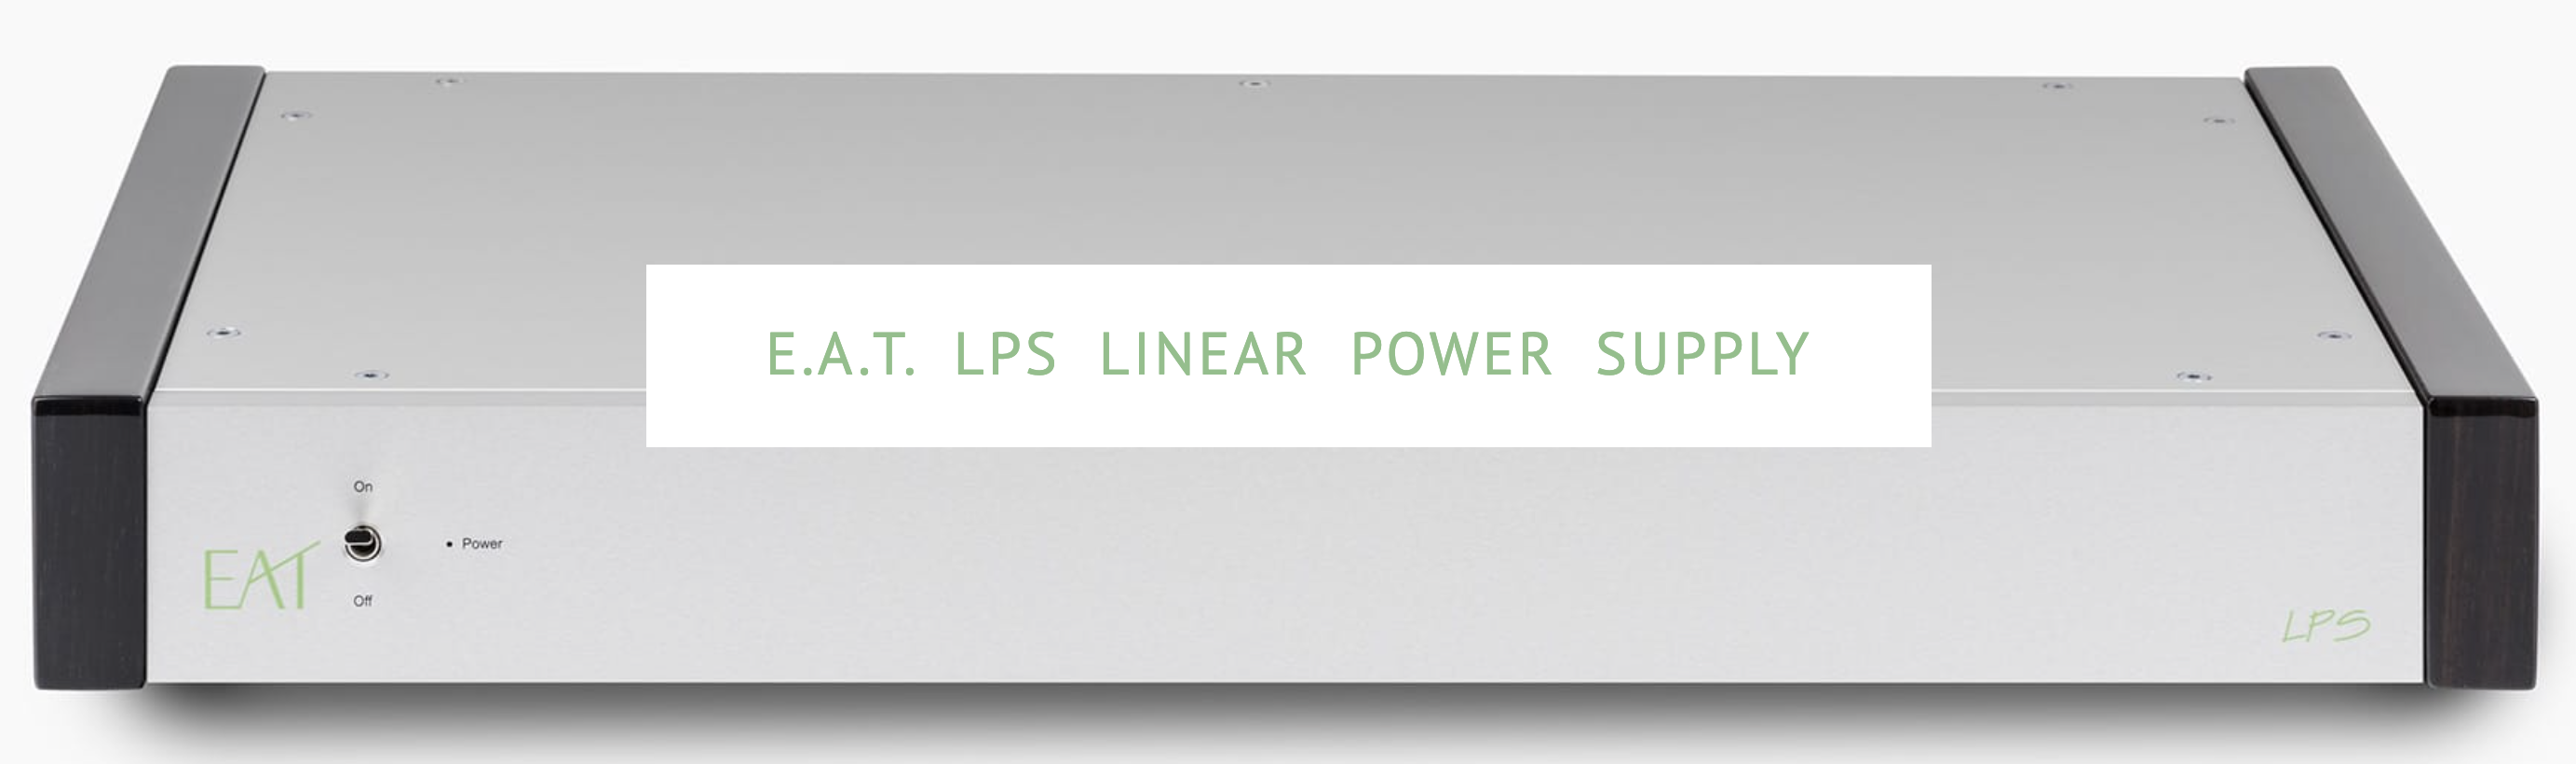 E.A.T. LPS LINEAR POWER SUPPLY